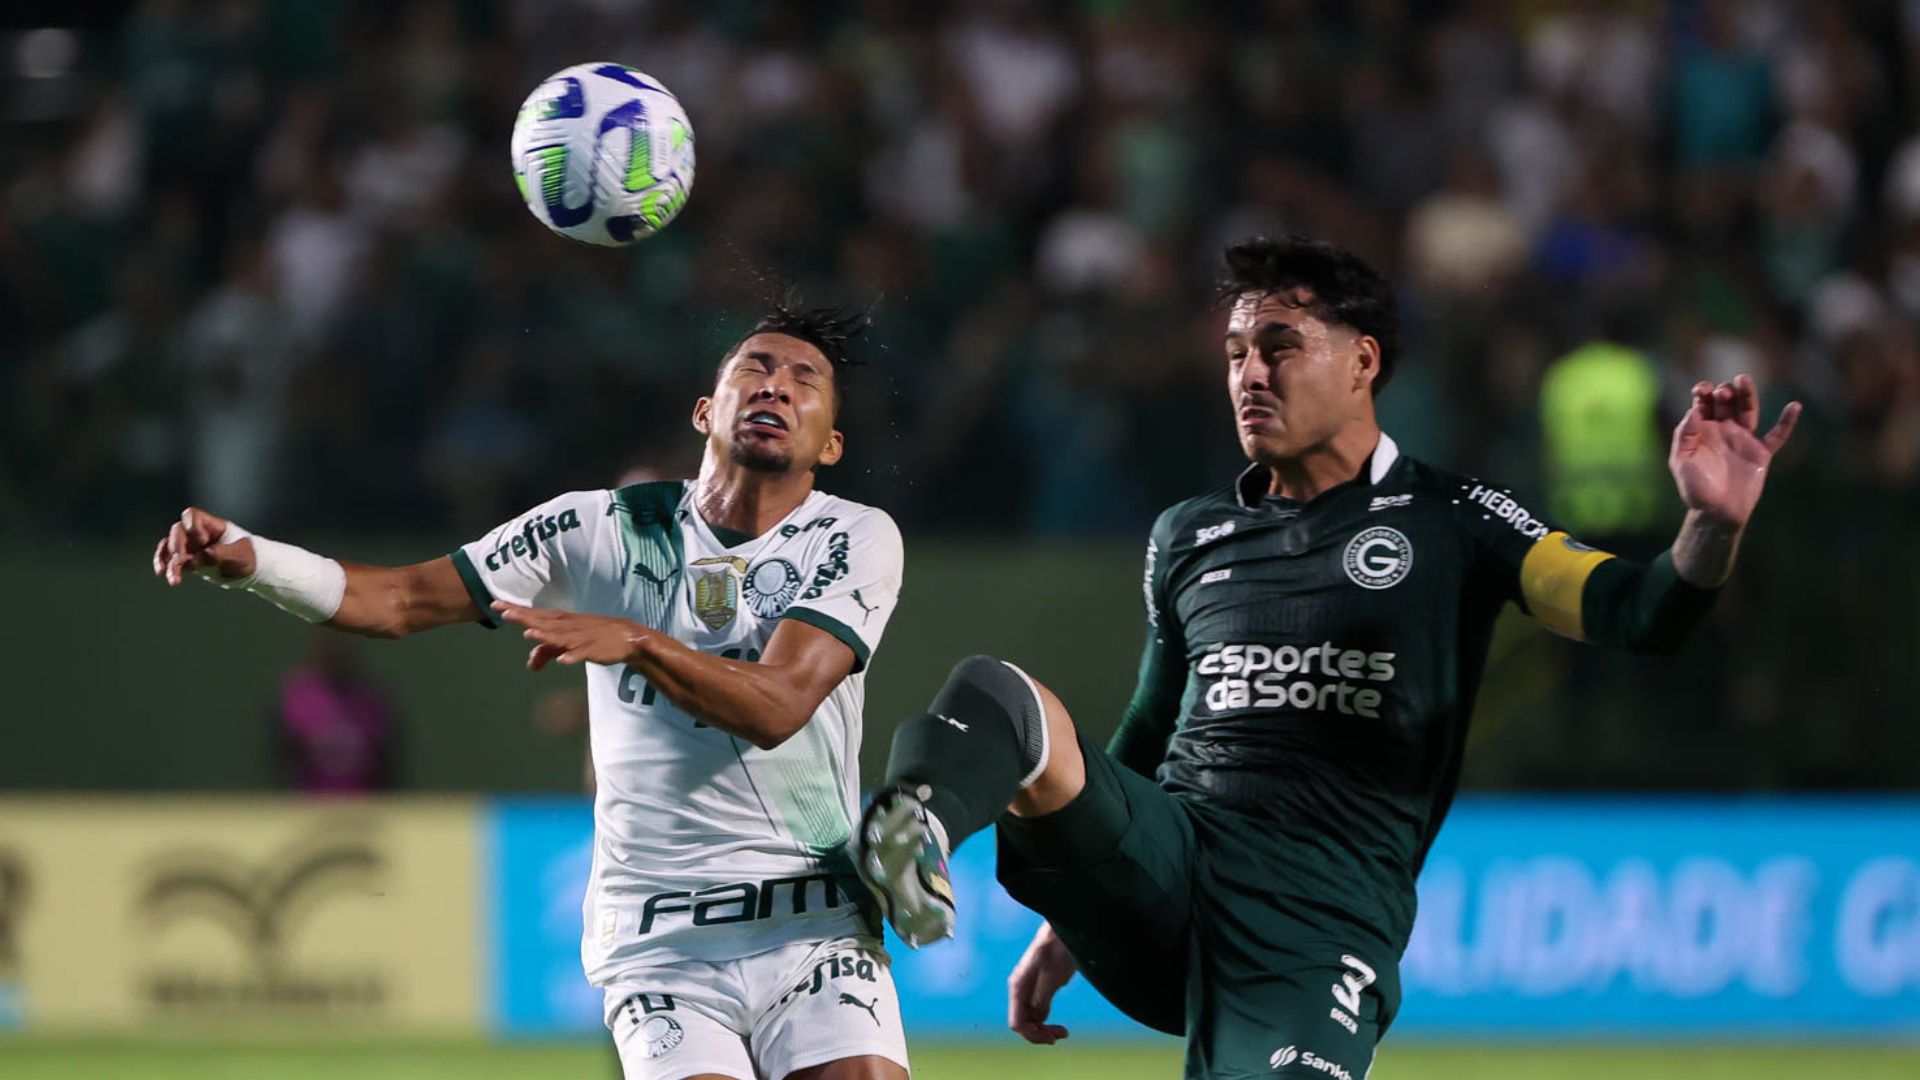 Moment of the foul that led to the expulsion of Lucas Halter (Credit: Cesar Greco / Palmeiras)